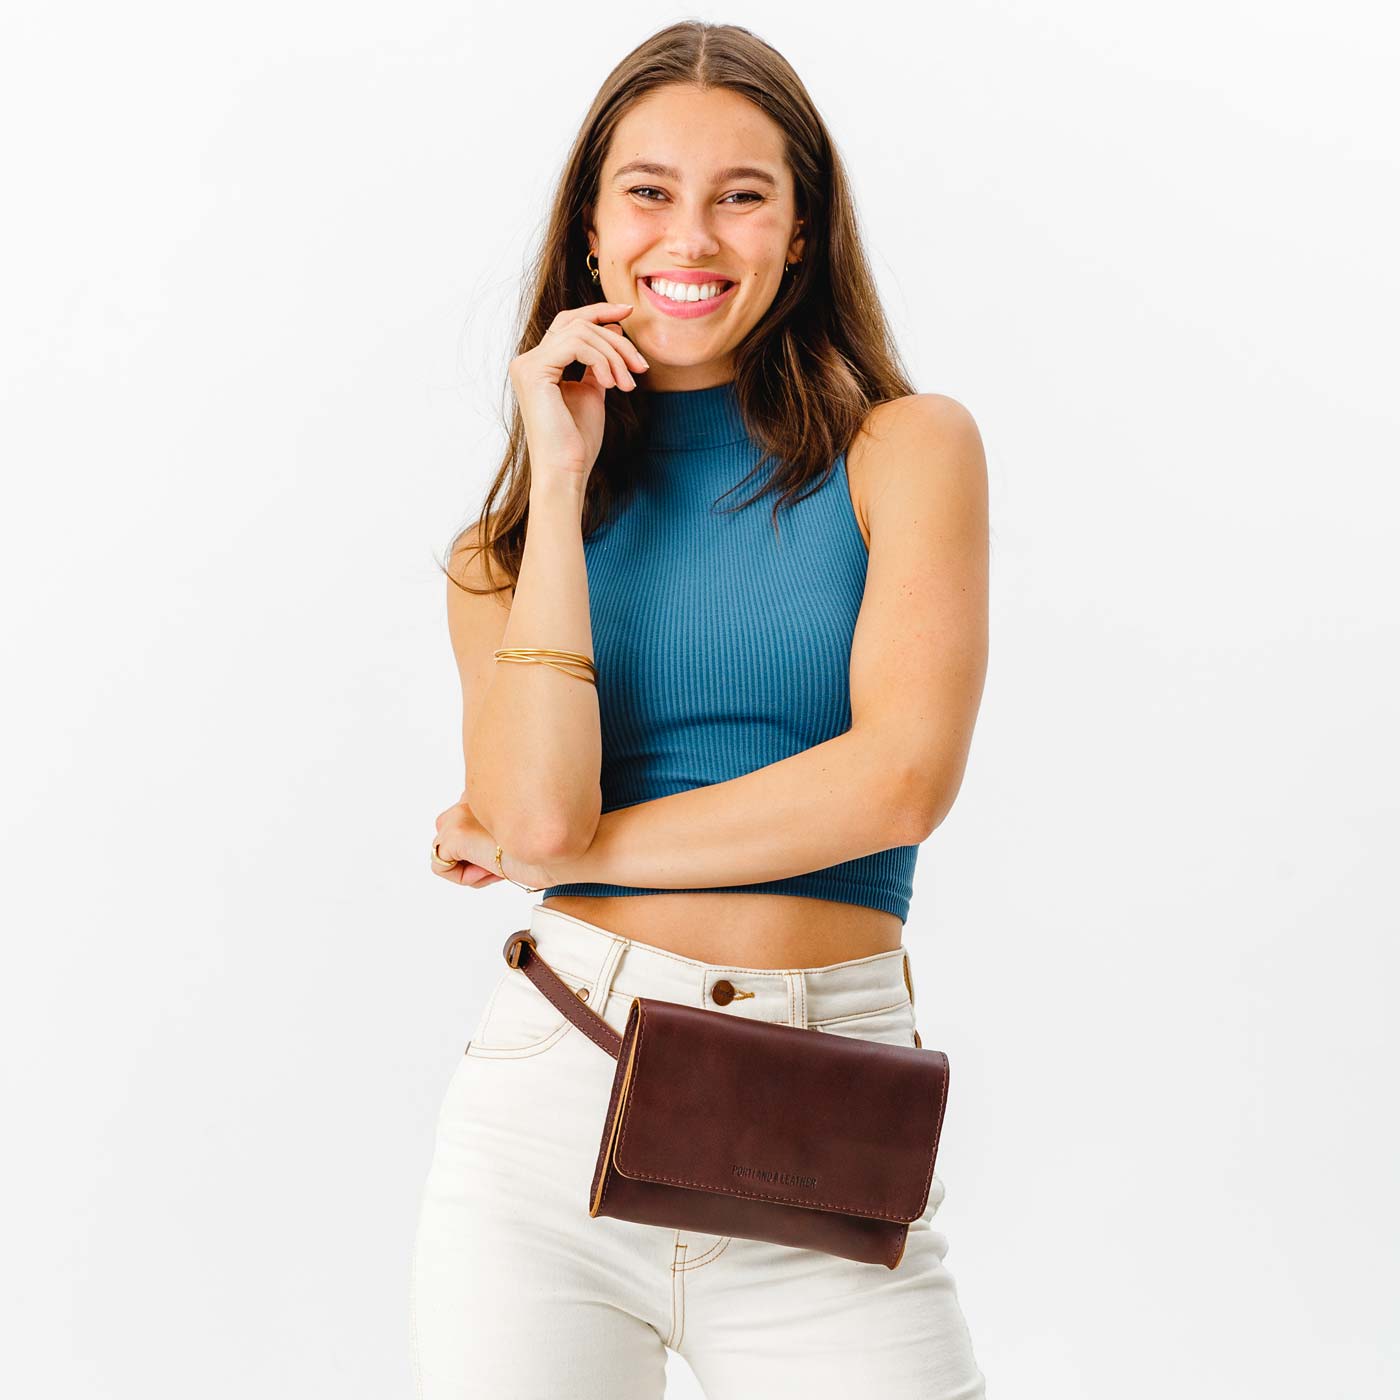 Four Stylish Fanny Packs You'll Wear Forever